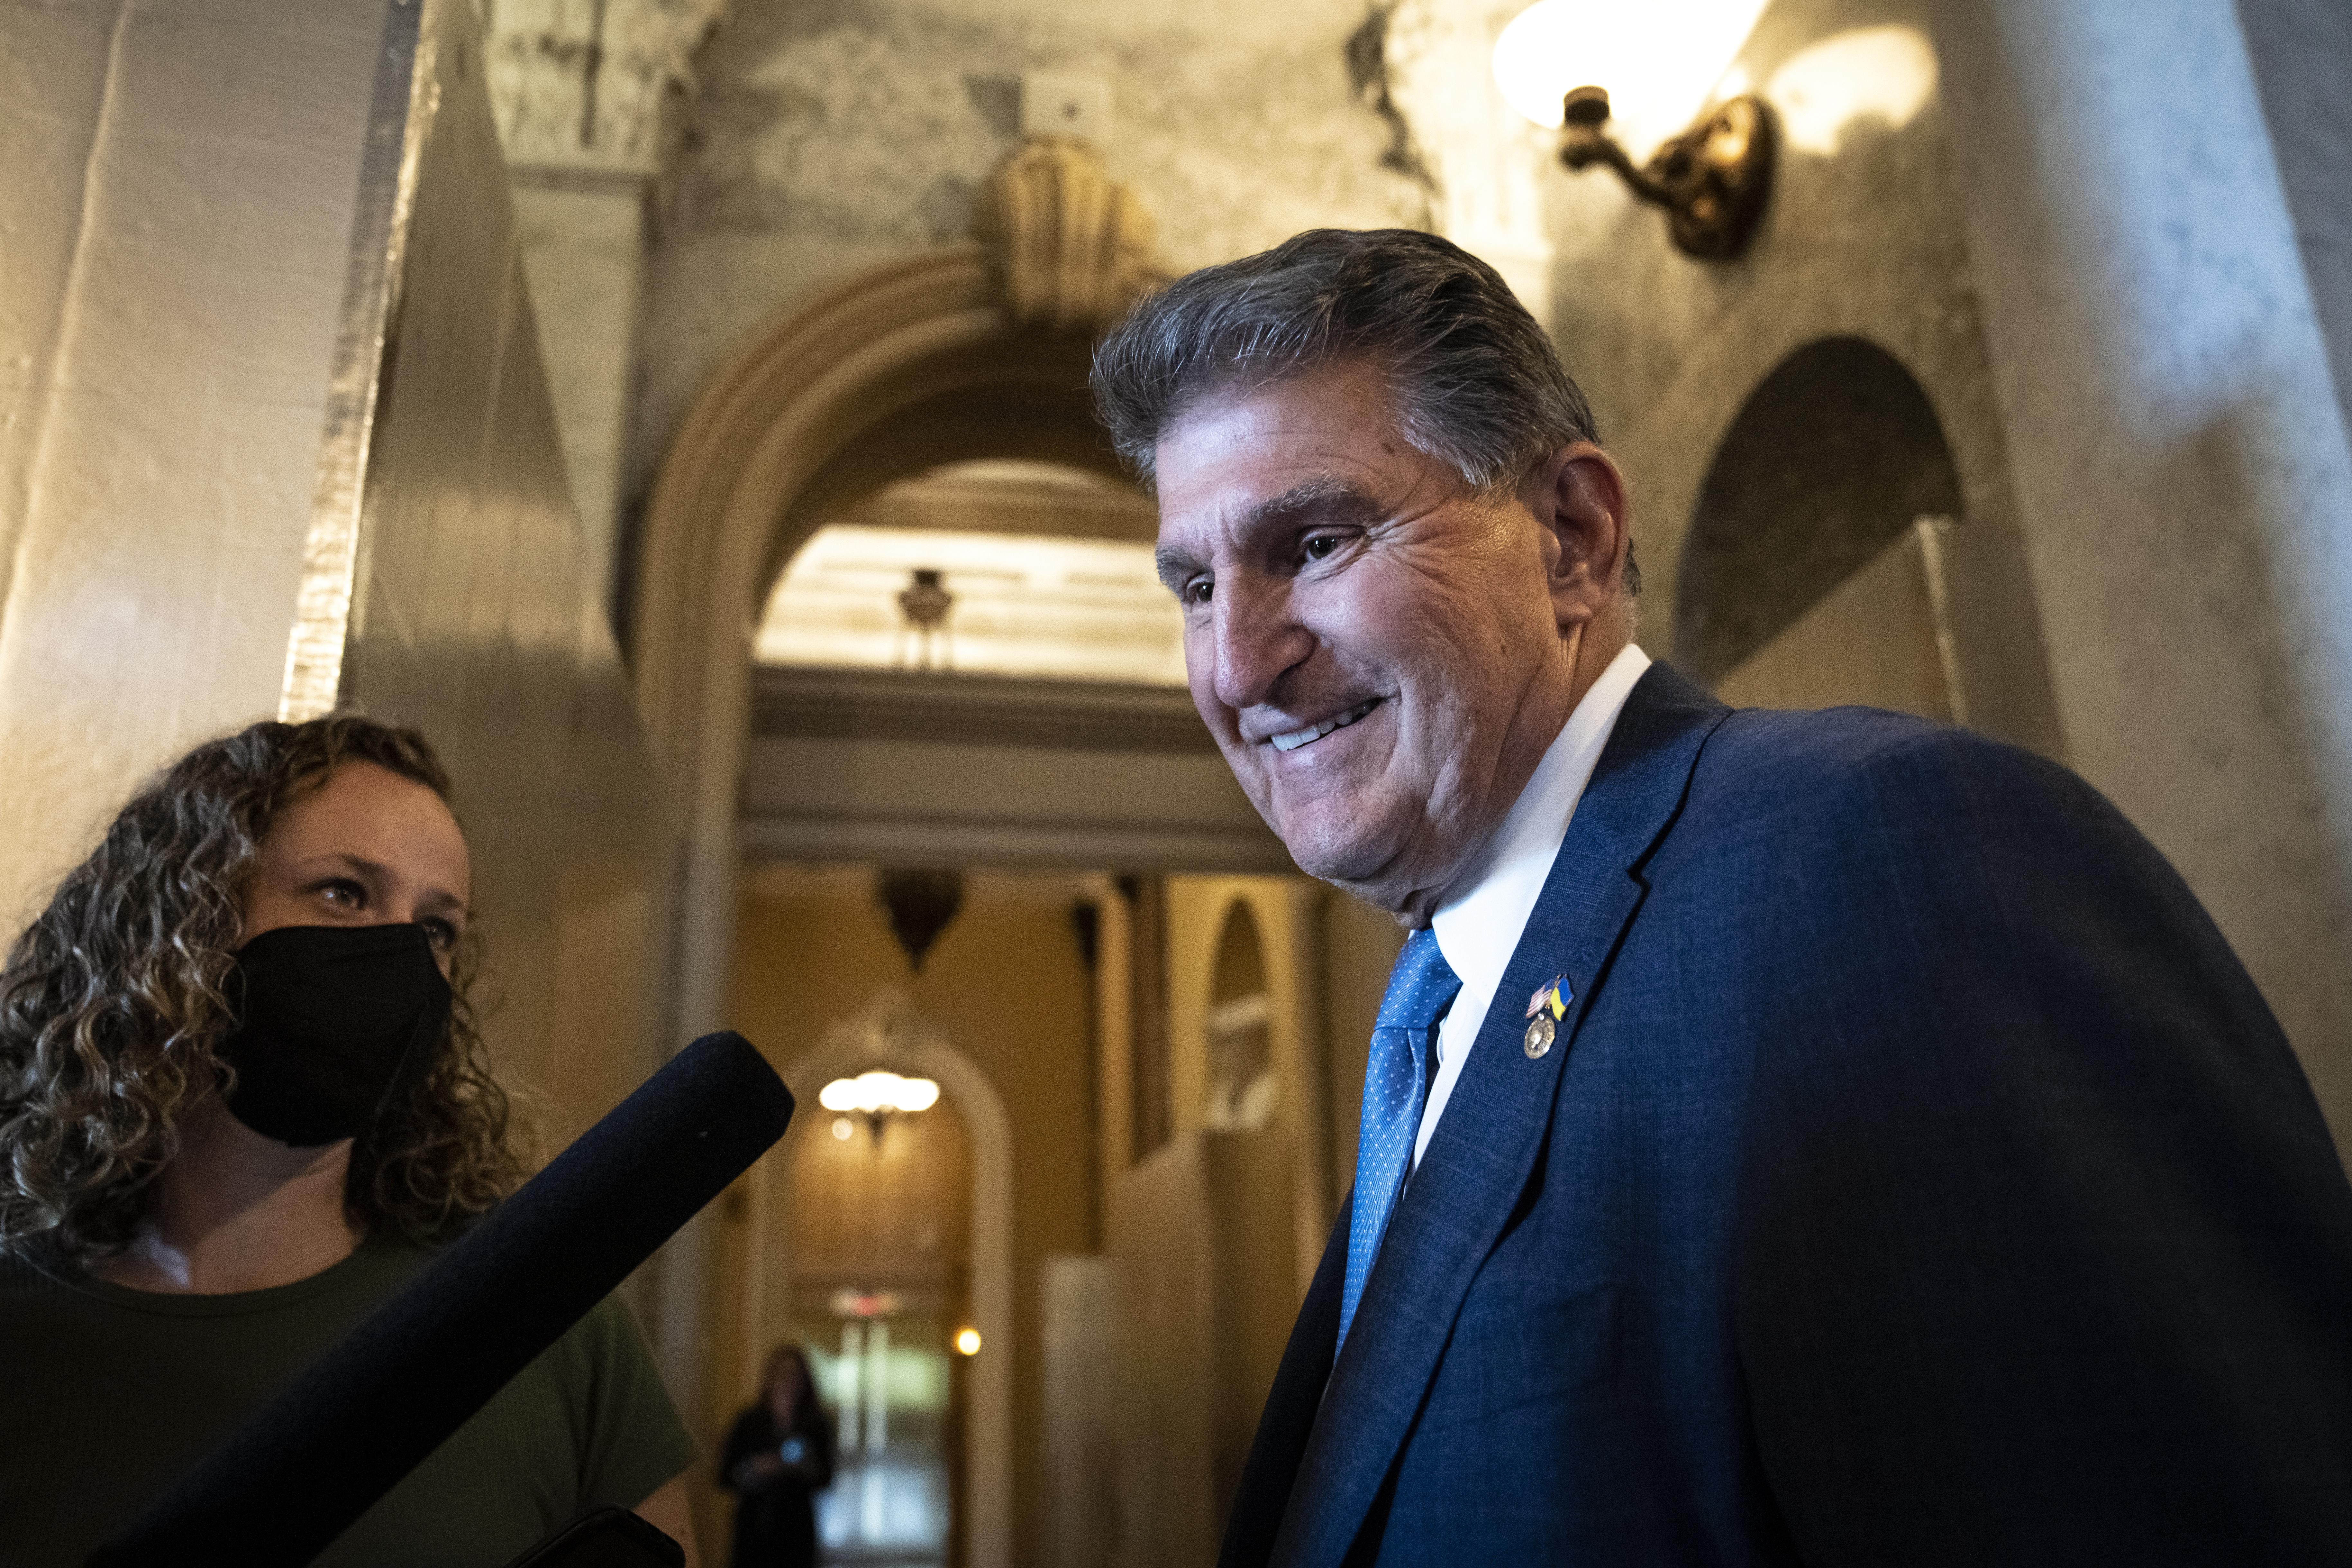 Joe Manchin smiles as a masked reporter with a microphone stands beside him.